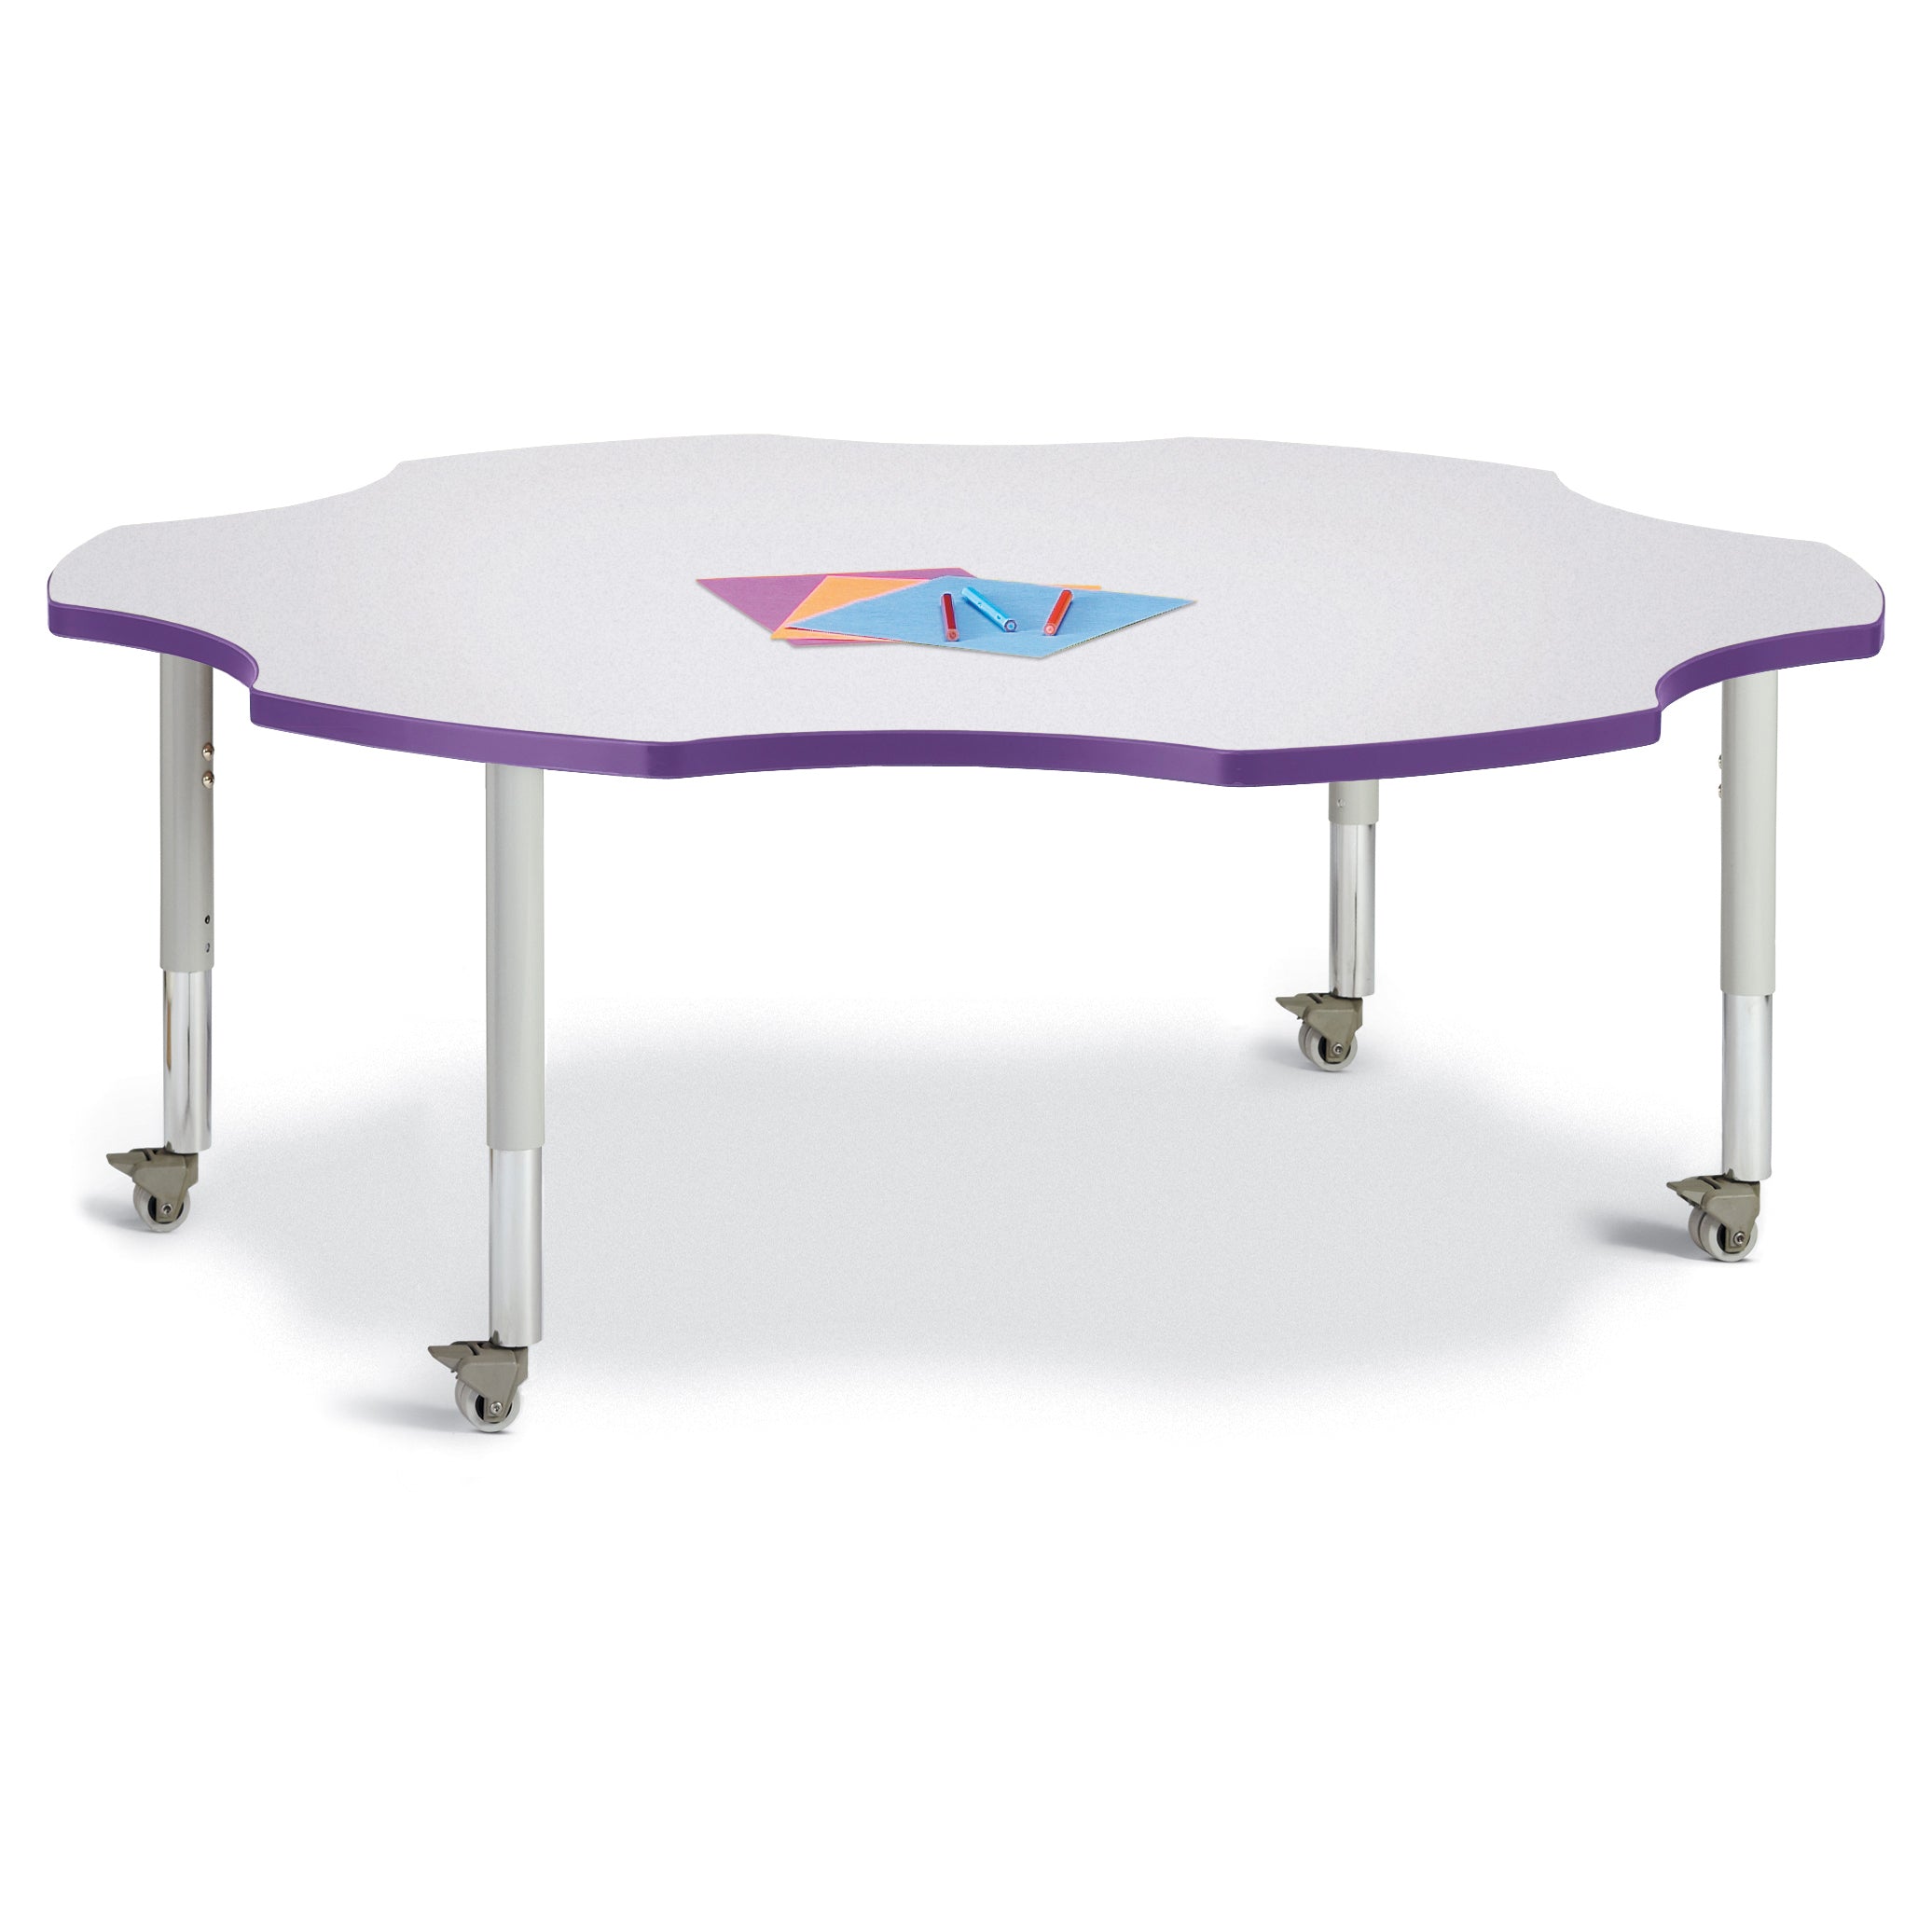 6458JCM004, Berries Six Leaf Activity Table - 60", Mobile - Freckled Gray/Purple/Gray